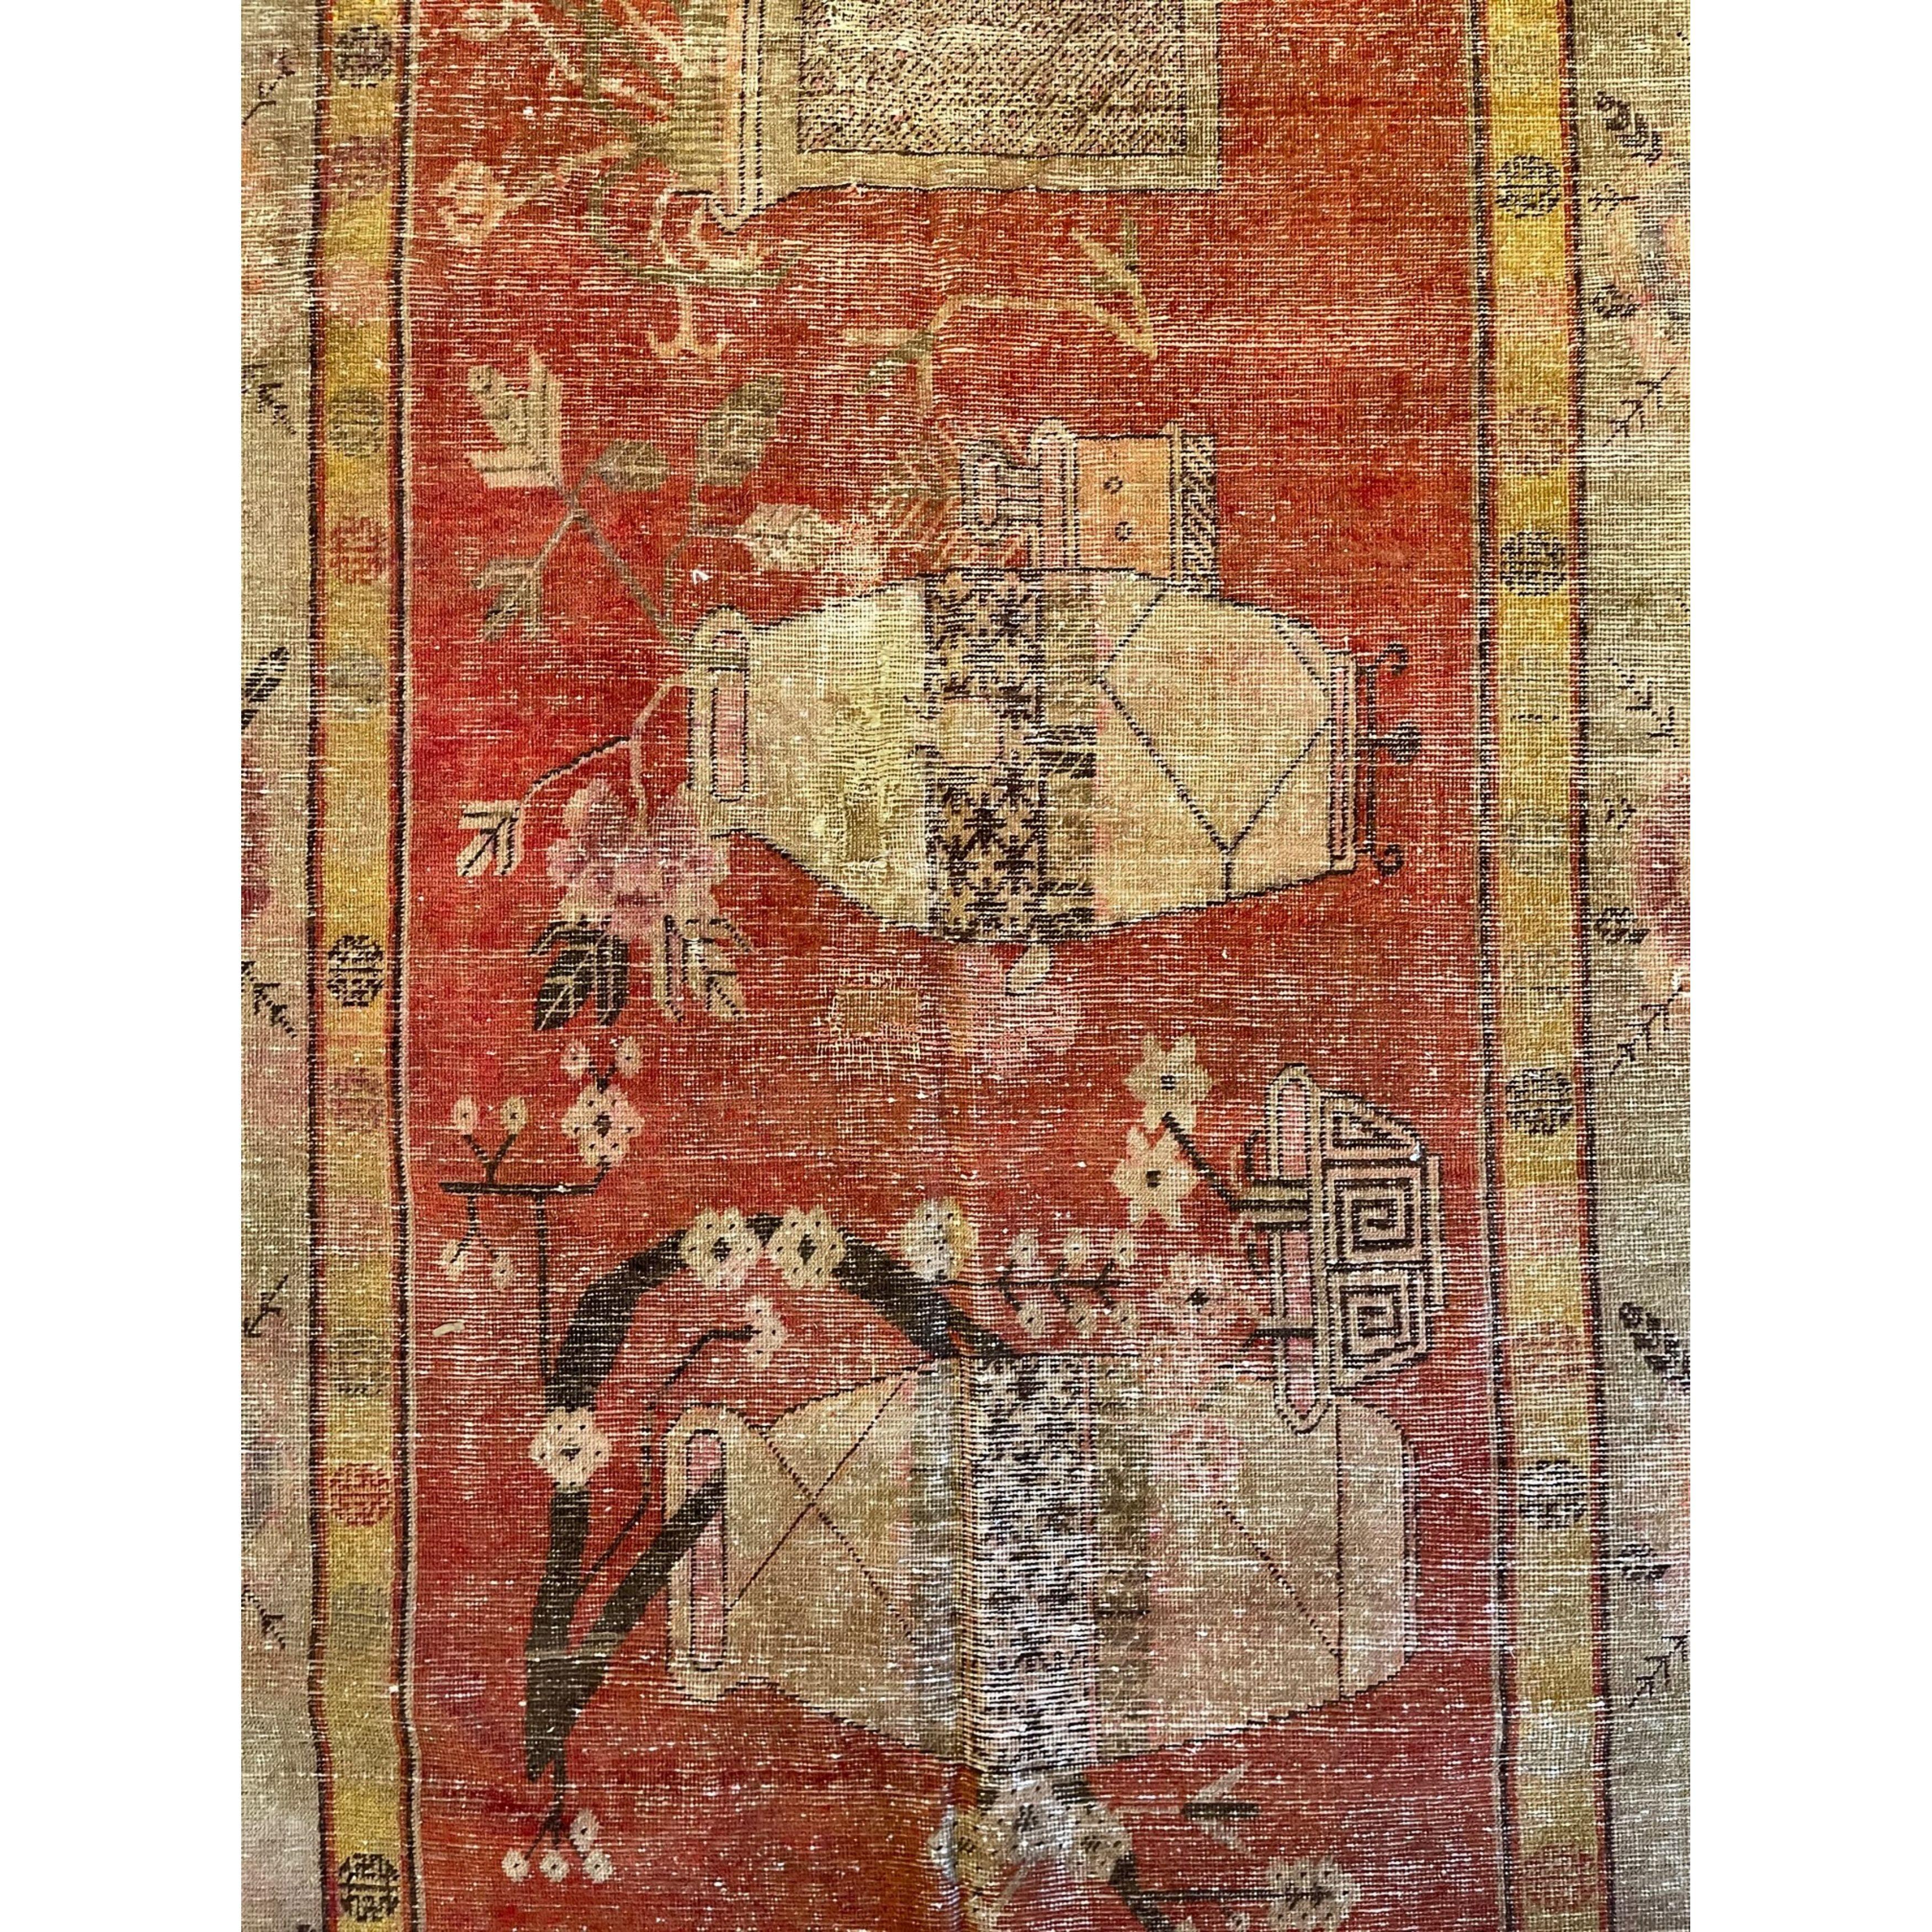 Antique Samarkand Rugs: The desert oasis of Khotan was an important stop on the Silk Road. The people of Khotan were expert carpet weavers who produced high quality antique rugs and carpets for both internal and the commercial trade. Samarkand